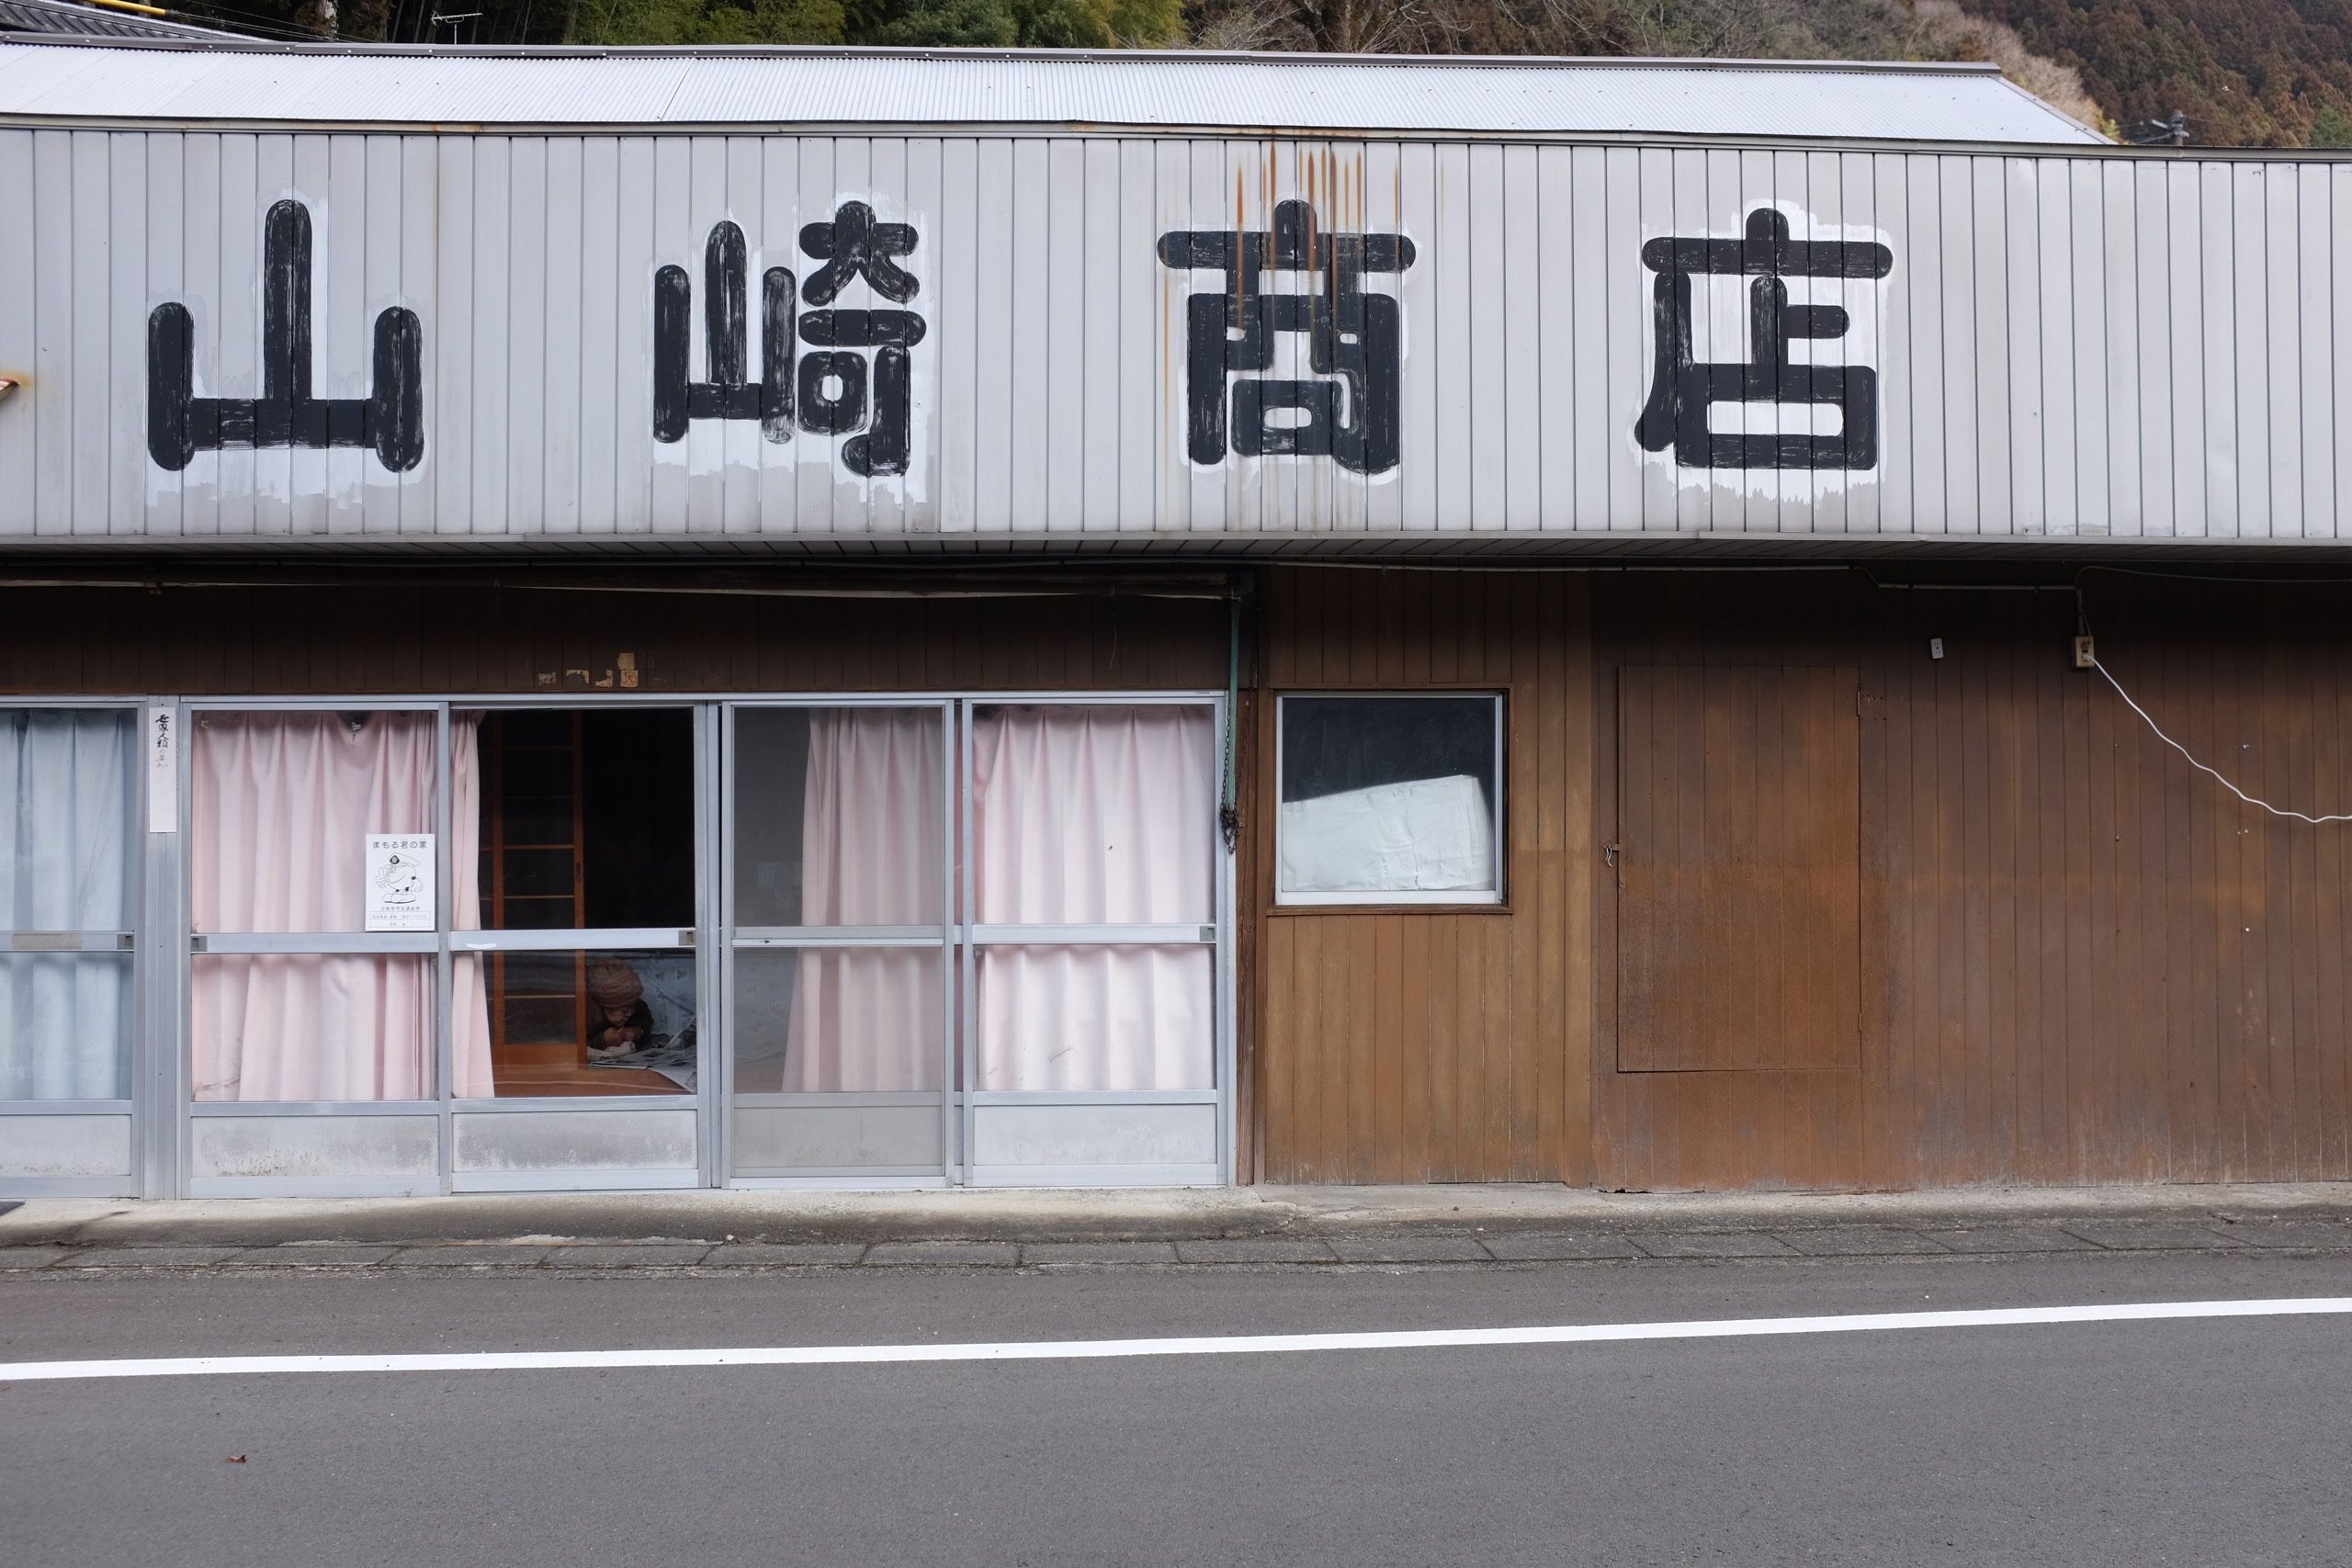 An older woman seen through the open curtain of a building with a sign out front that translates to Yamazaki’s Shop.